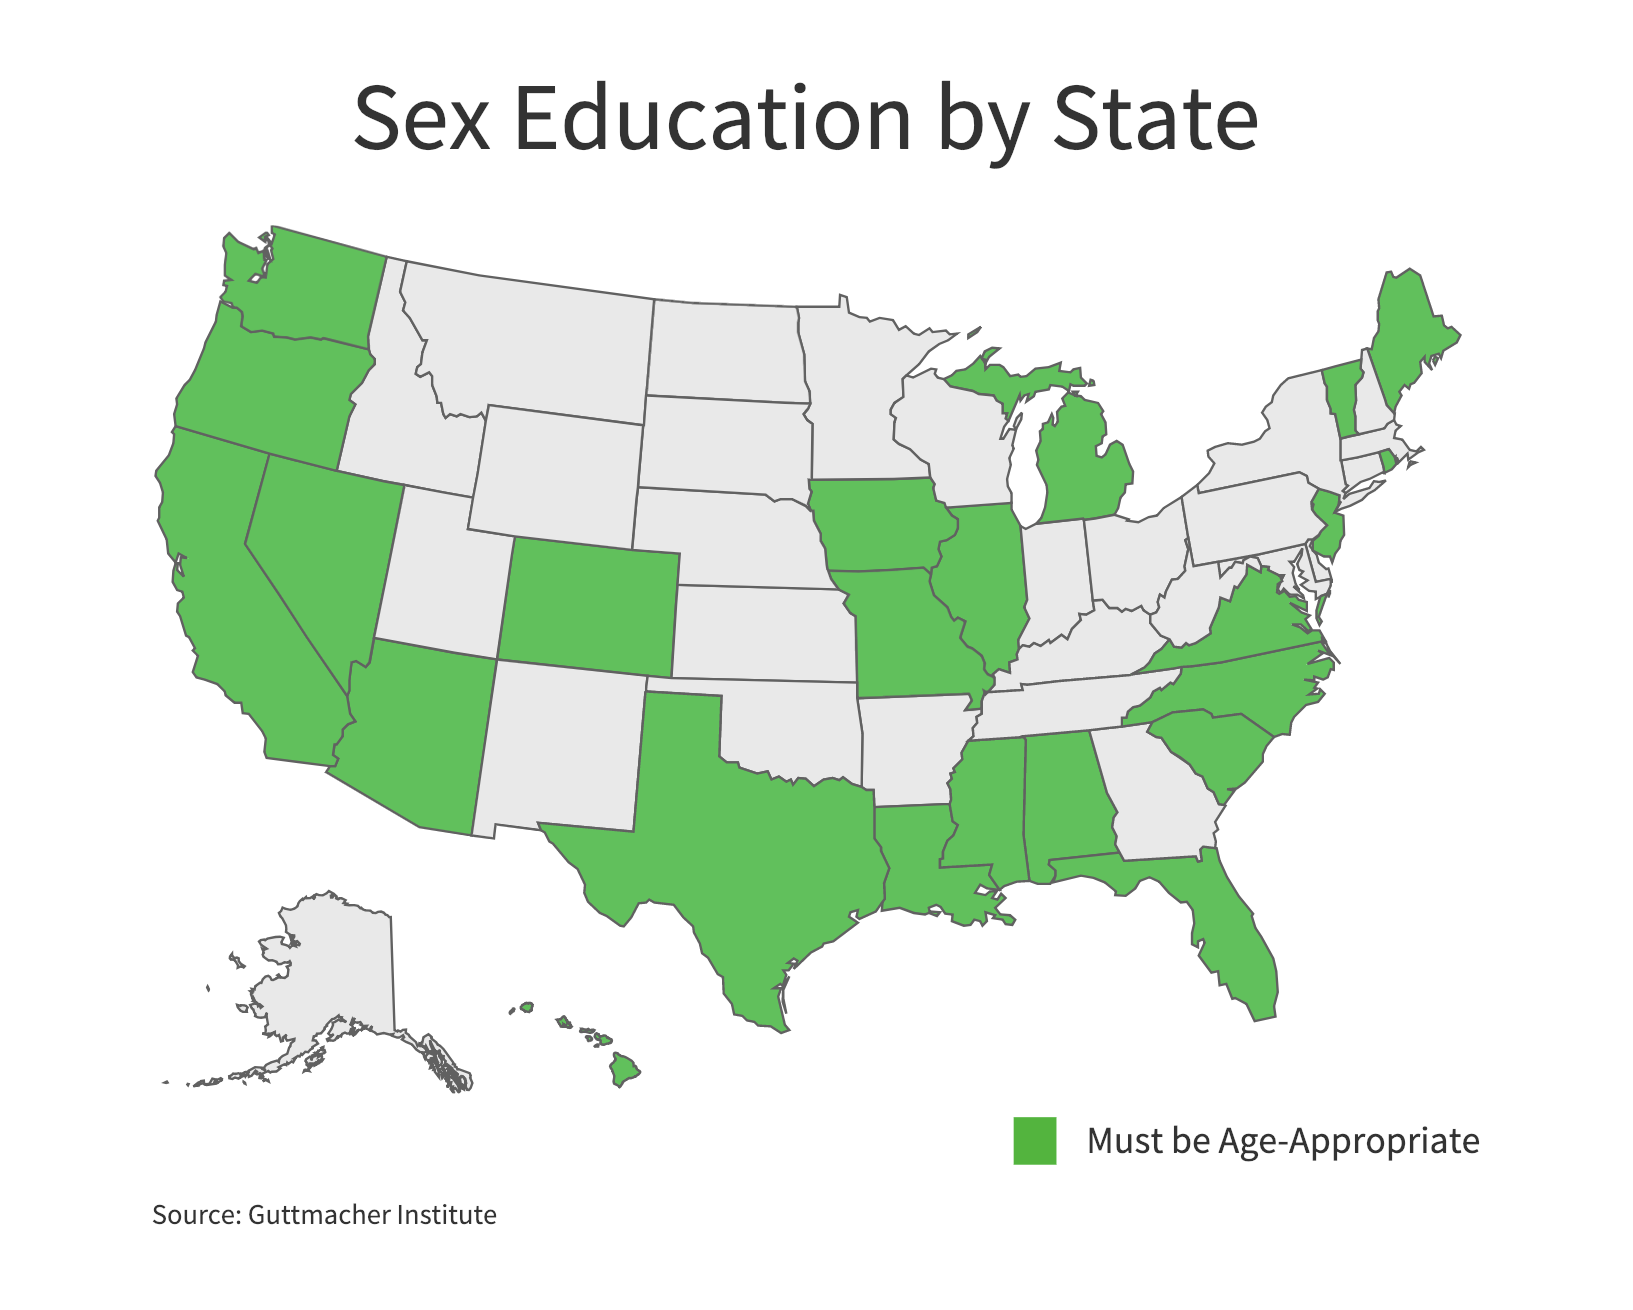 Twenty-three states and the District of Columbia require that when sexual education is provided it be age-appropriate. (Charts by Ester Wells/MNS)